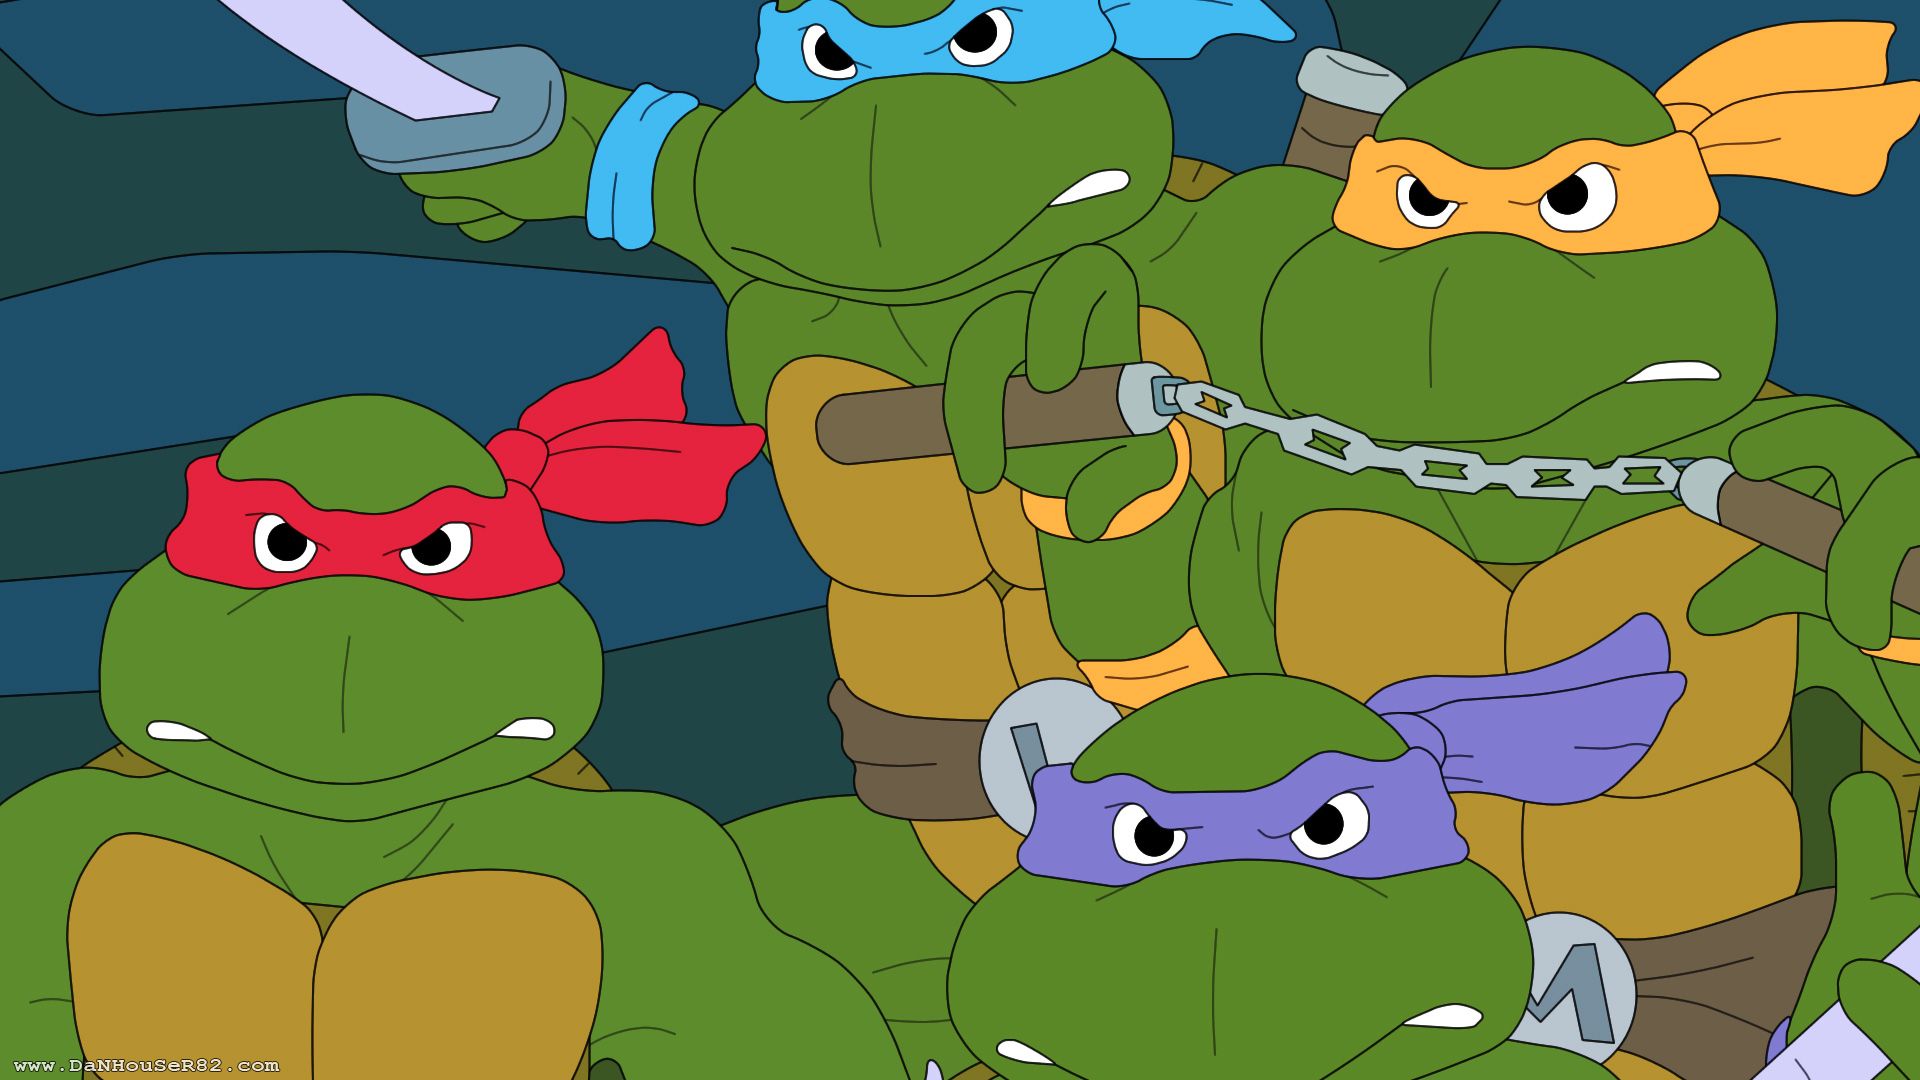 Catch up on the twisted history of TMNT before seeing the new movie this weekend